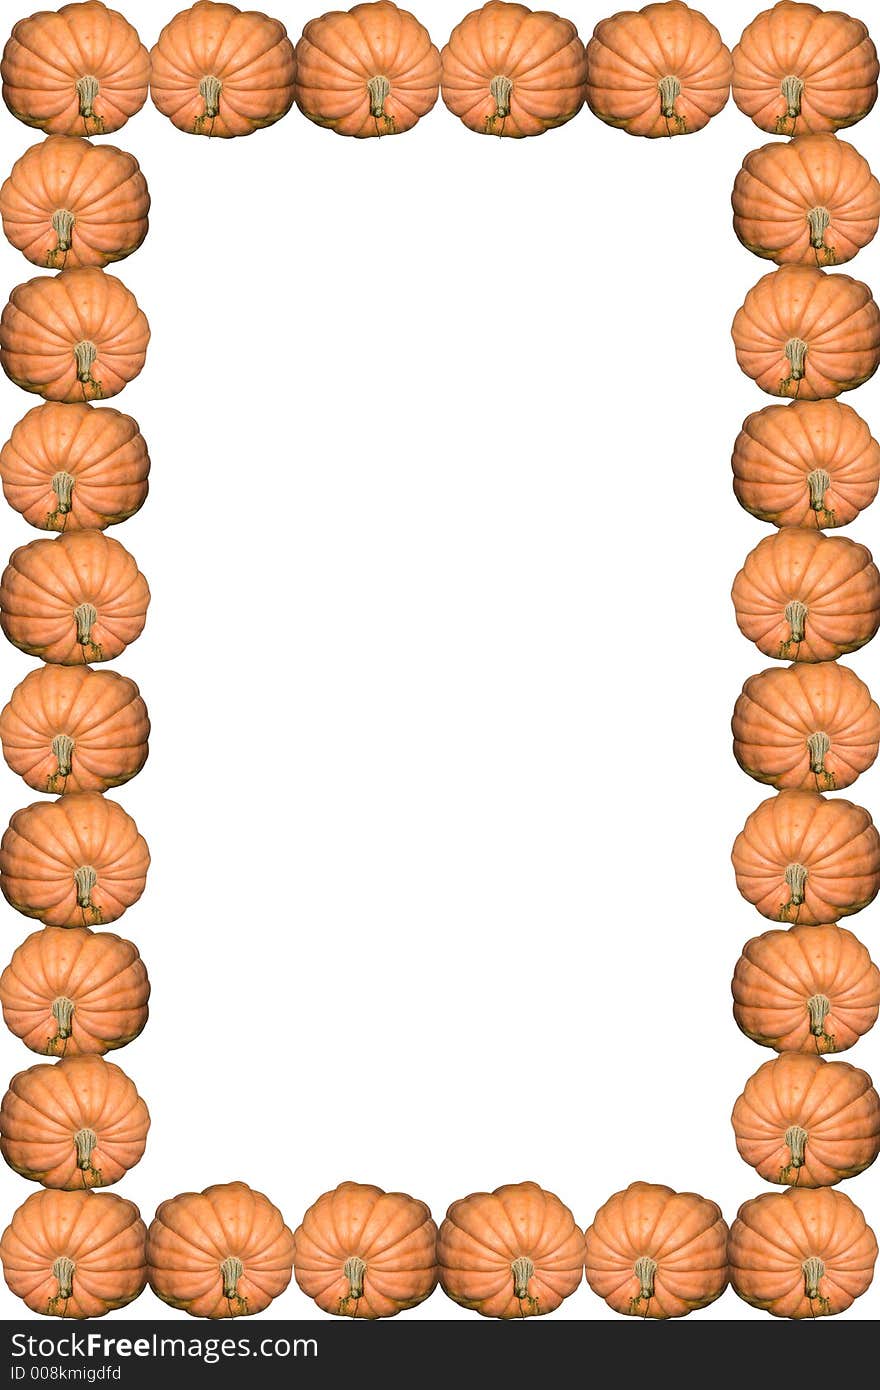 A frame of pumpkins on a white background. A frame of pumpkins on a white background